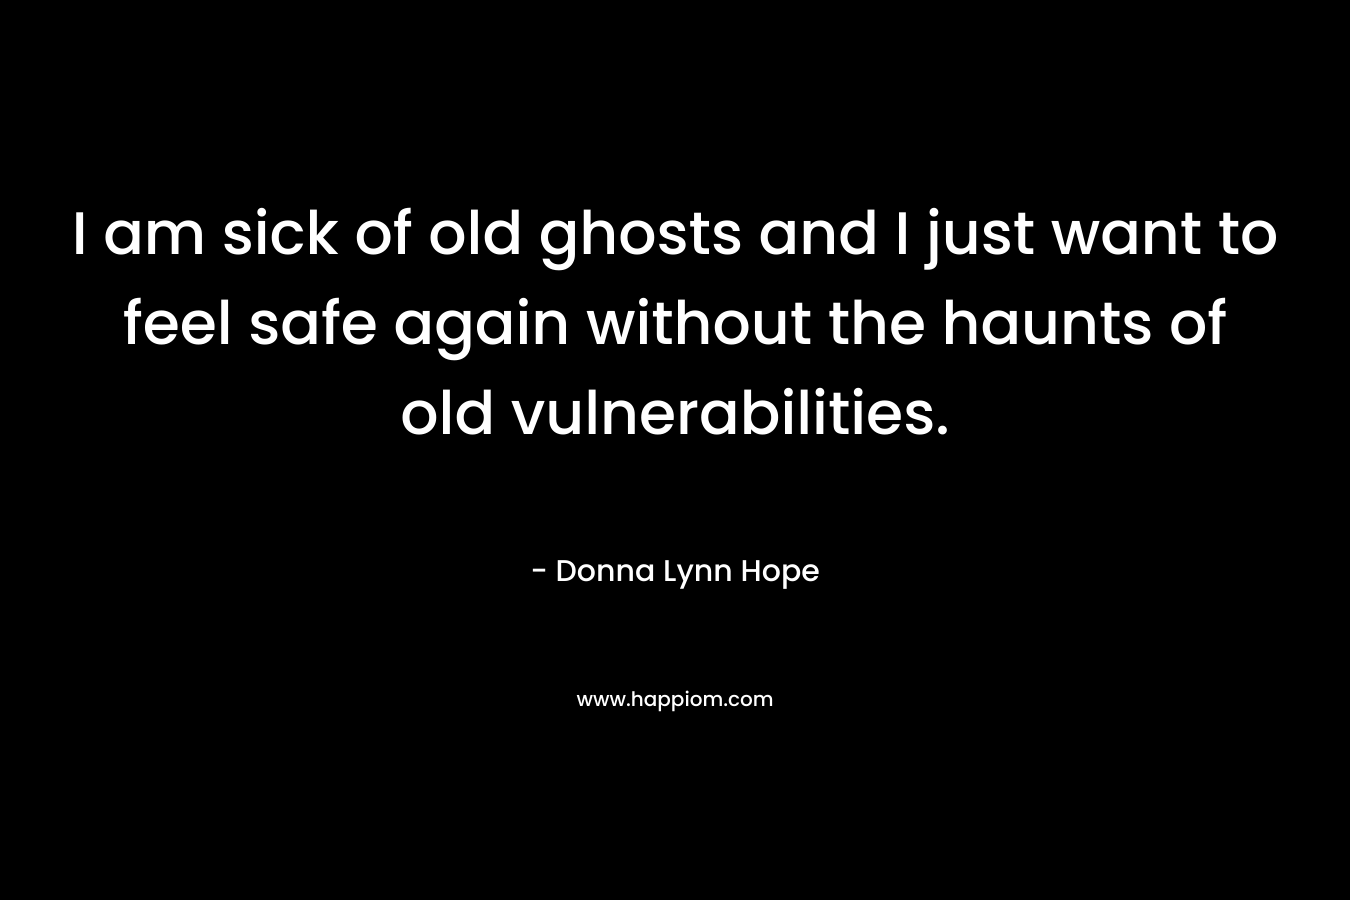 I am sick of old ghosts and I just want to feel safe again without the haunts of old vulnerabilities.